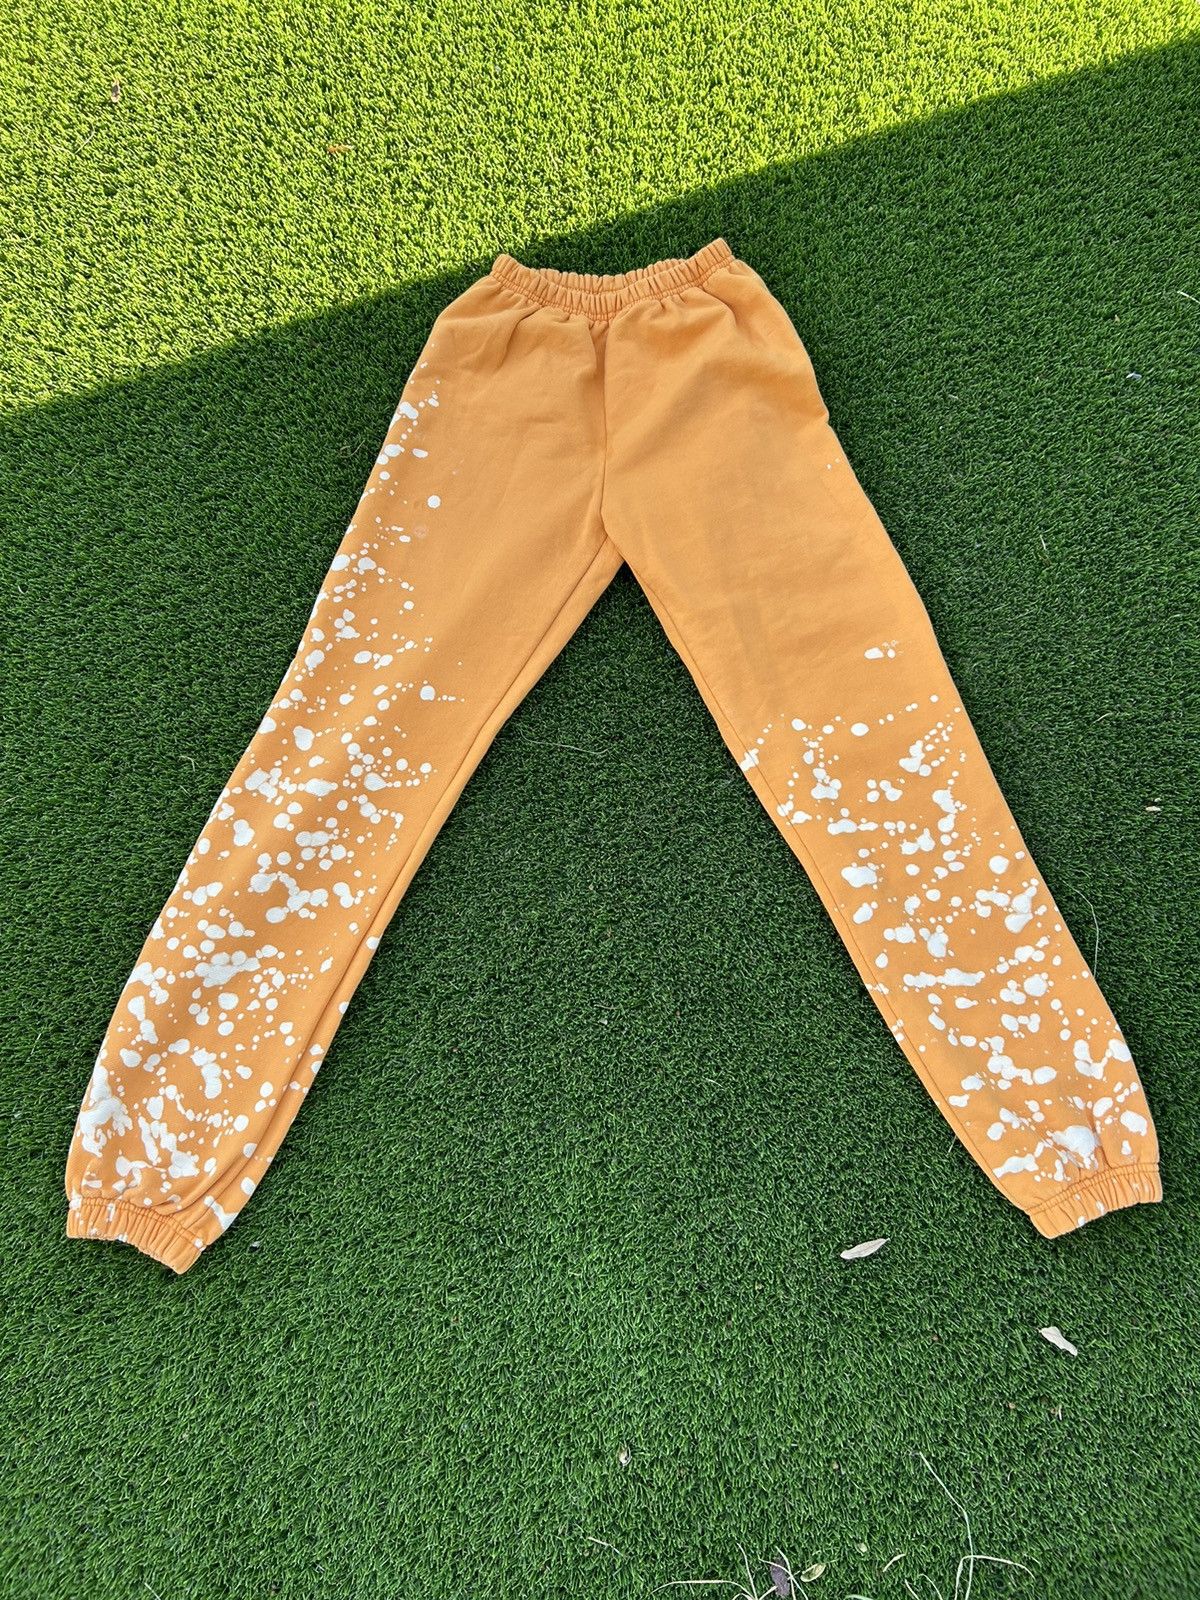 Designer Liberal Youth Ministry Sweatpants | Grailed